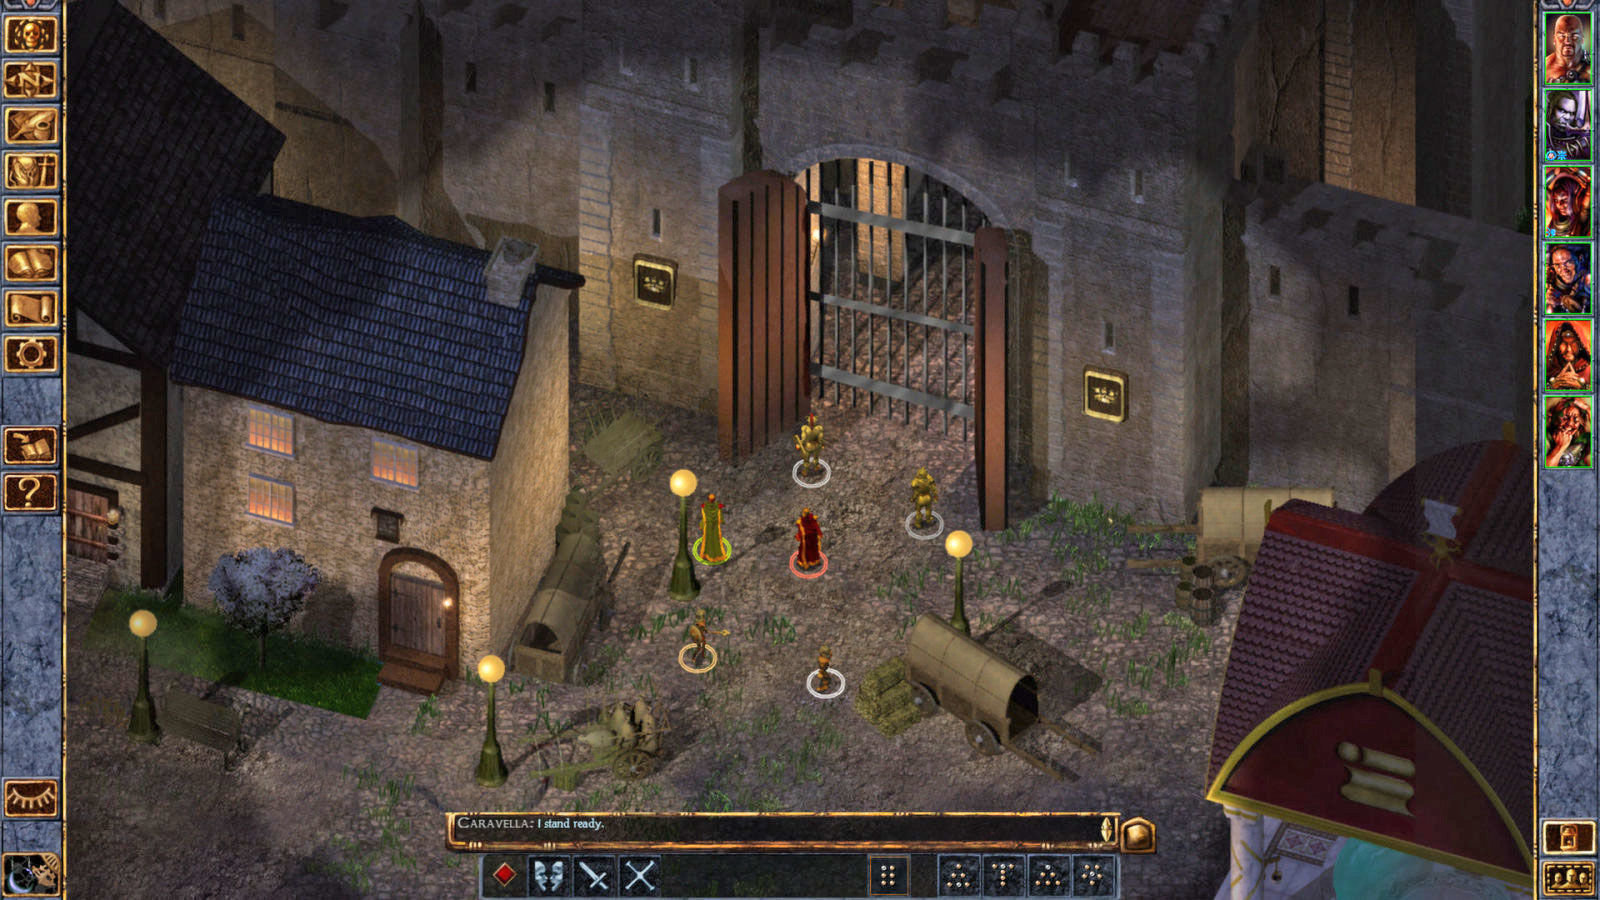 Classic RPGs including Baldur's Gate and Neverwinter Nights are coming to consoles this year